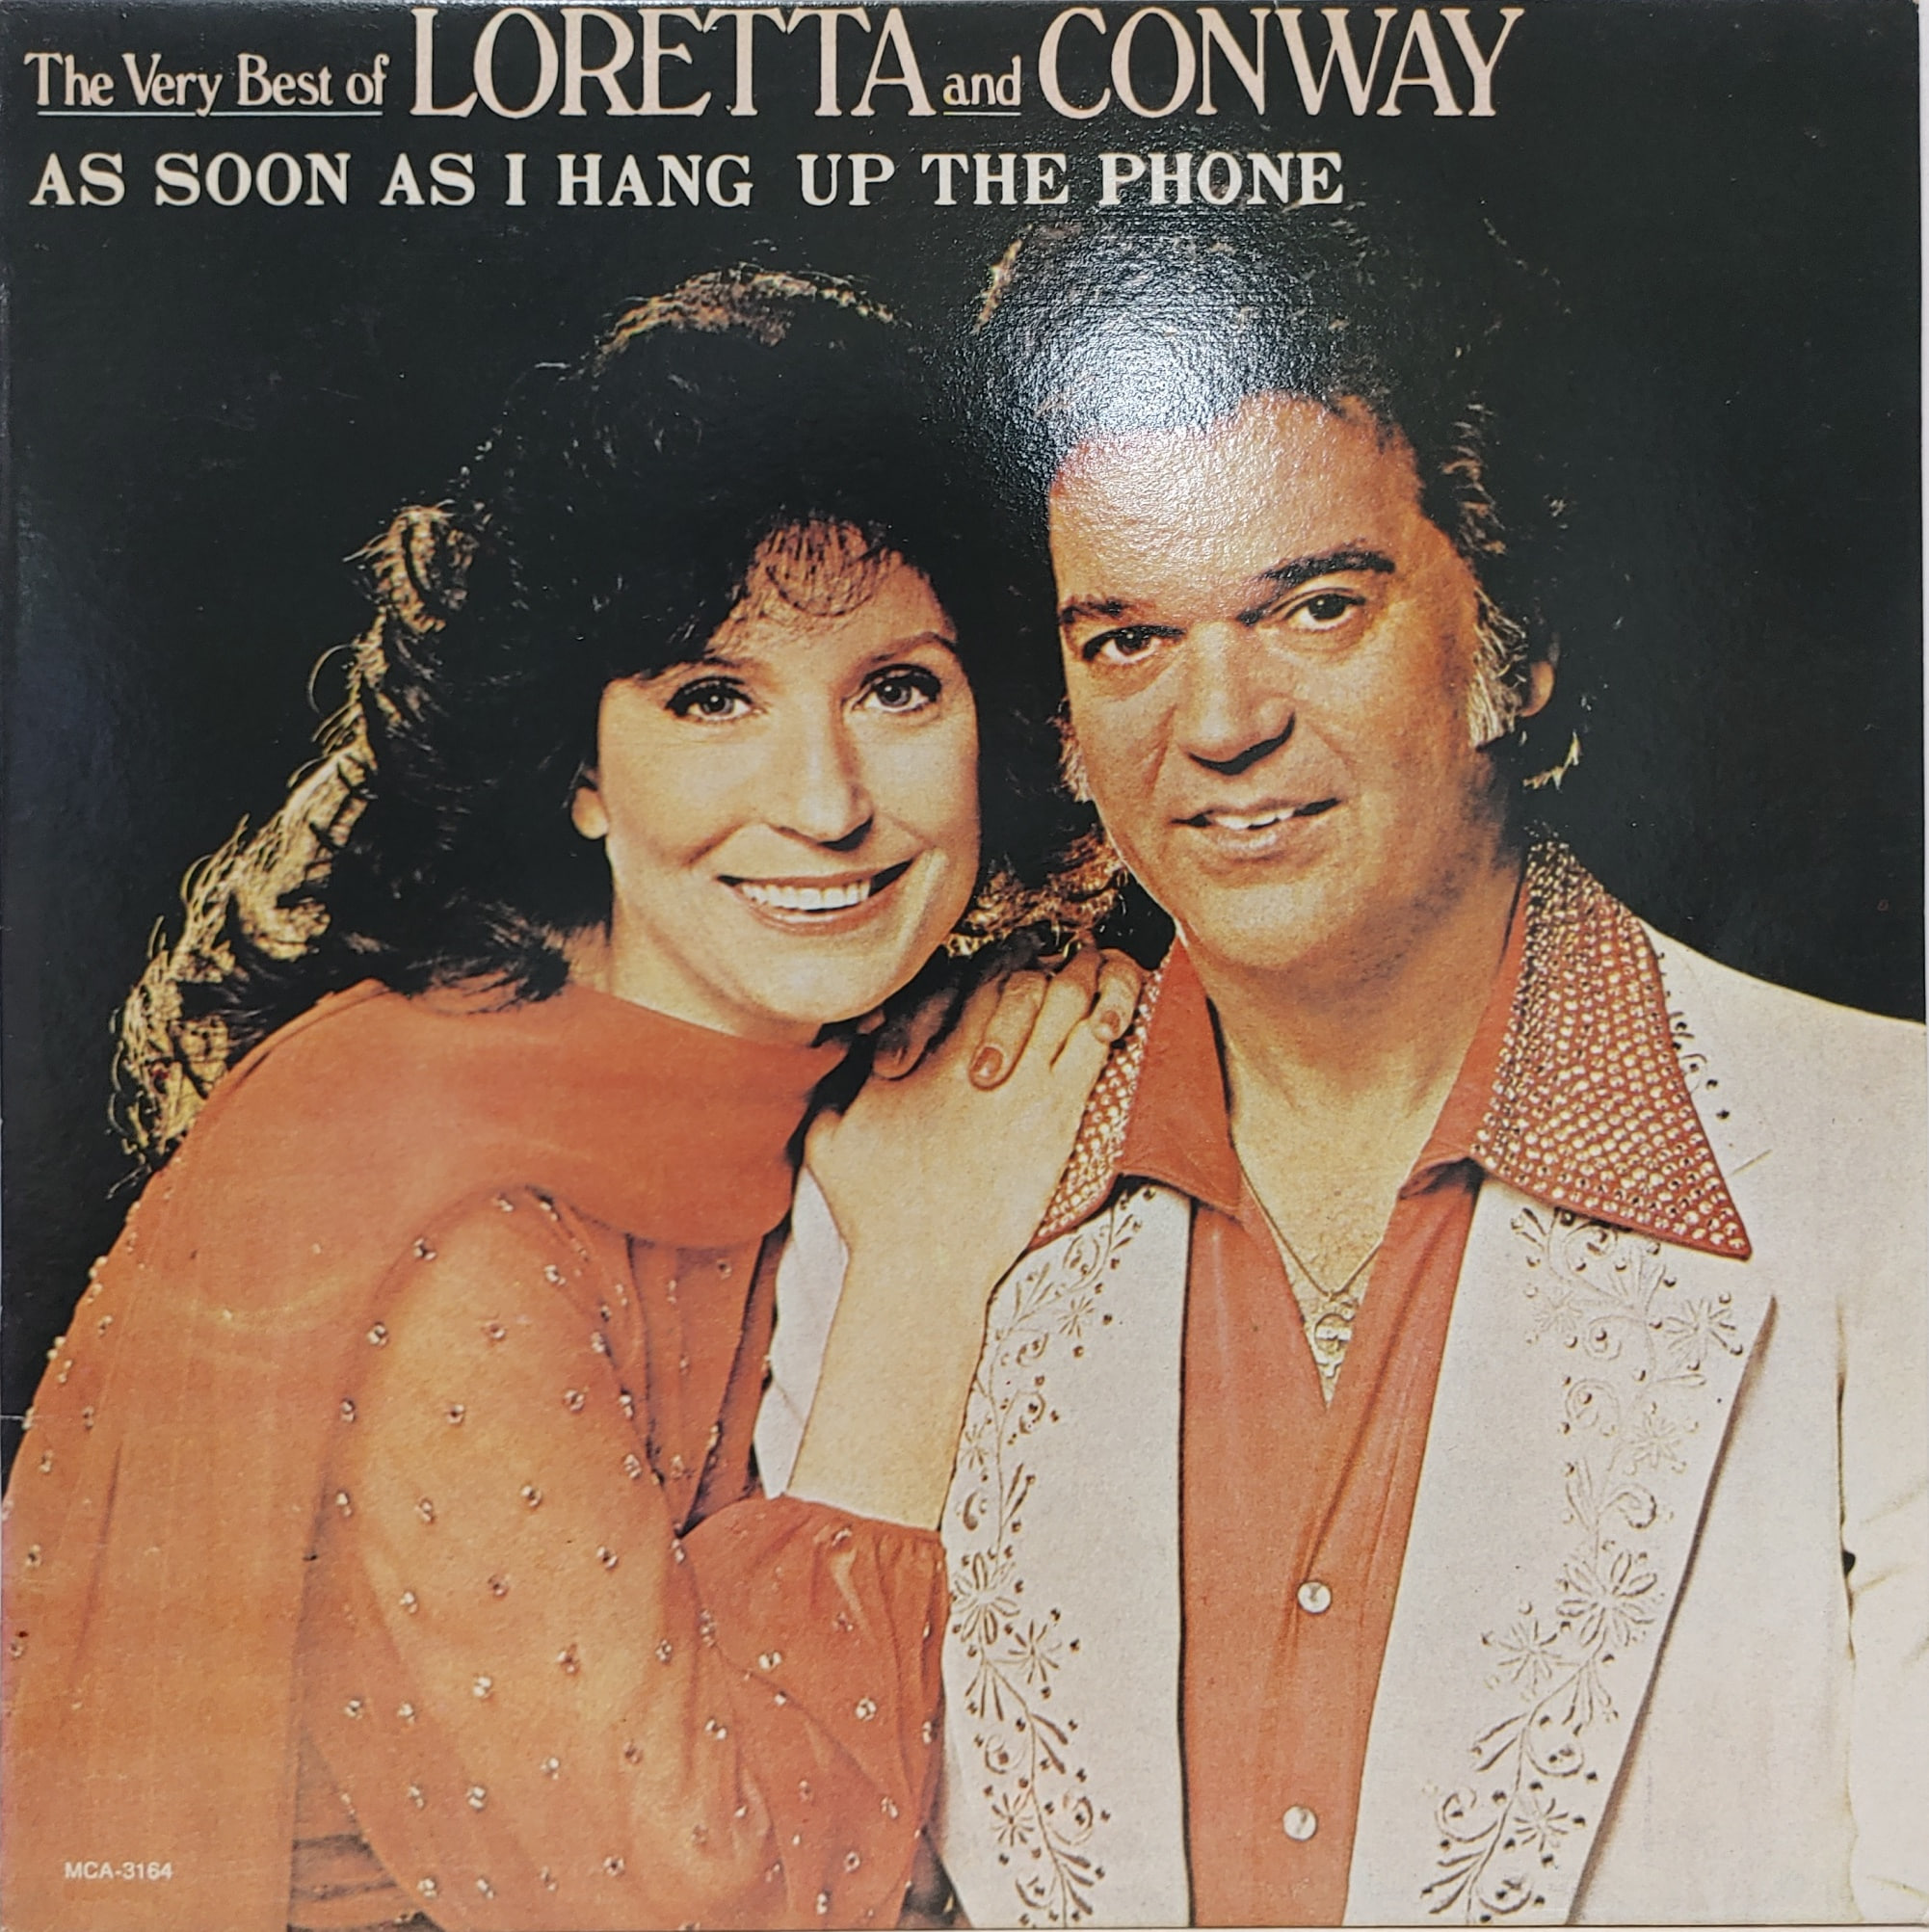 LORETTA AND CONWAY / THE VERY BEST OF... AS SOON AS I HANG UP THE PHONE